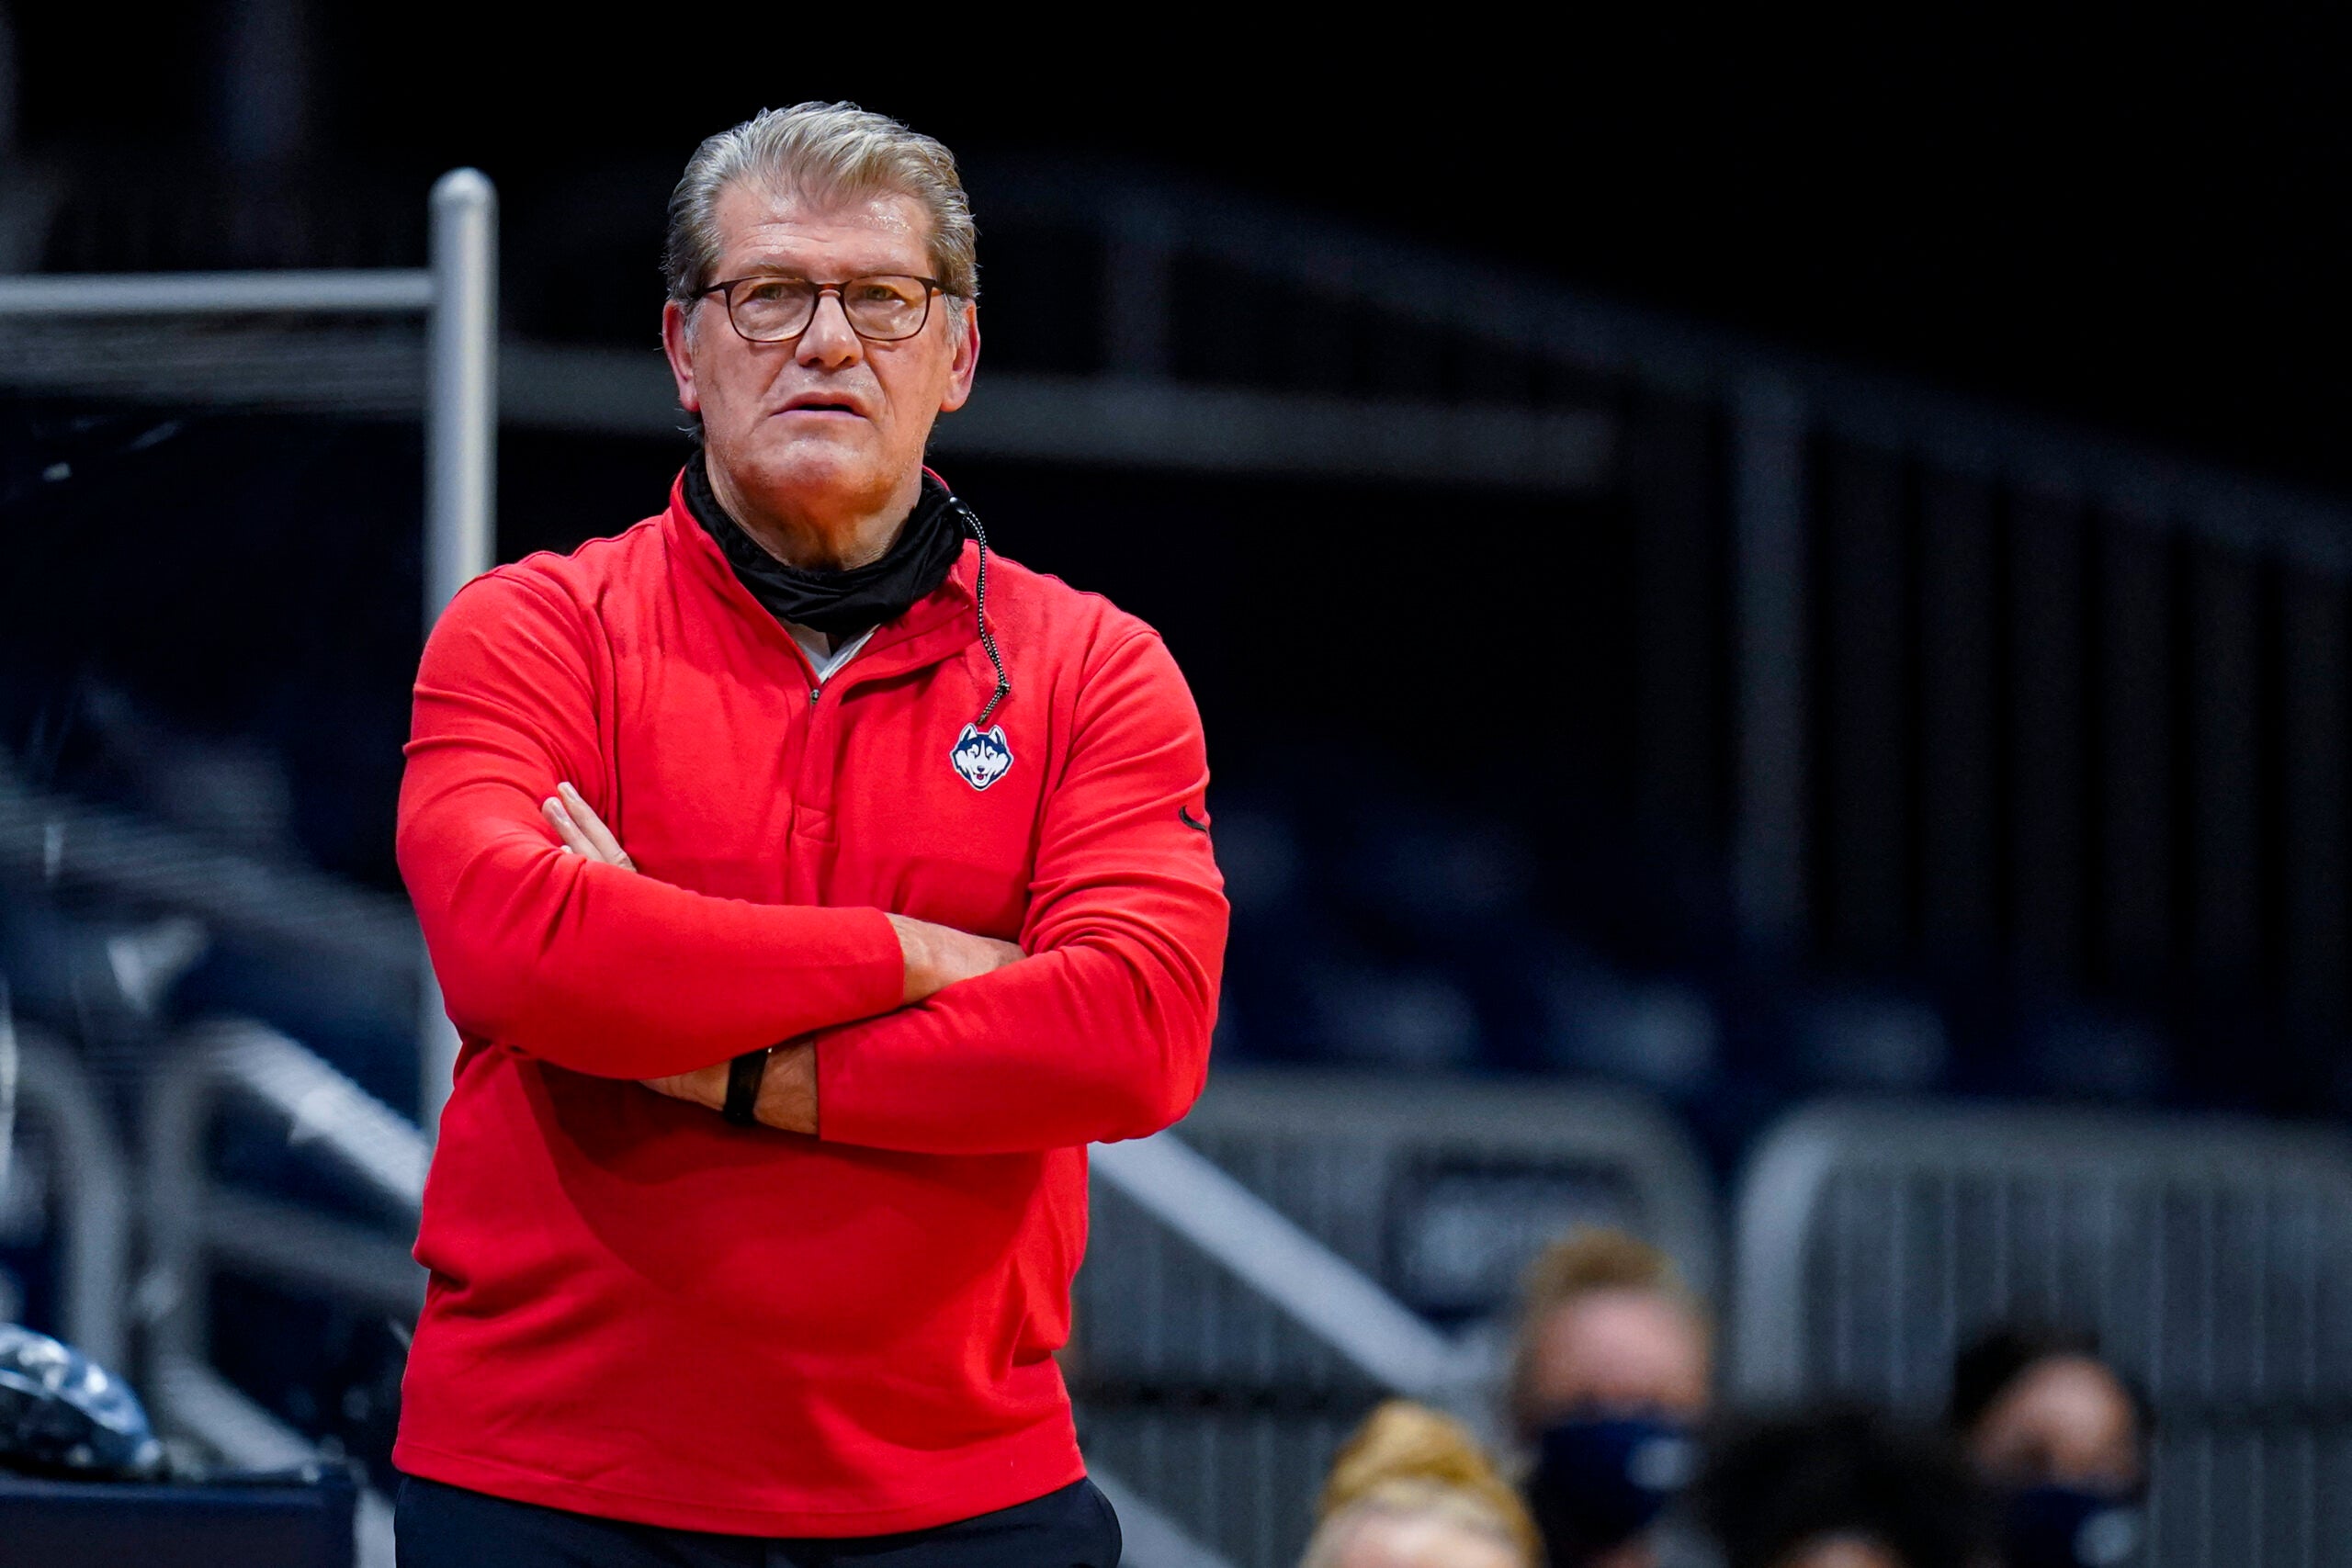 Geno Auriemma defends selection of 5 UConn players for . team